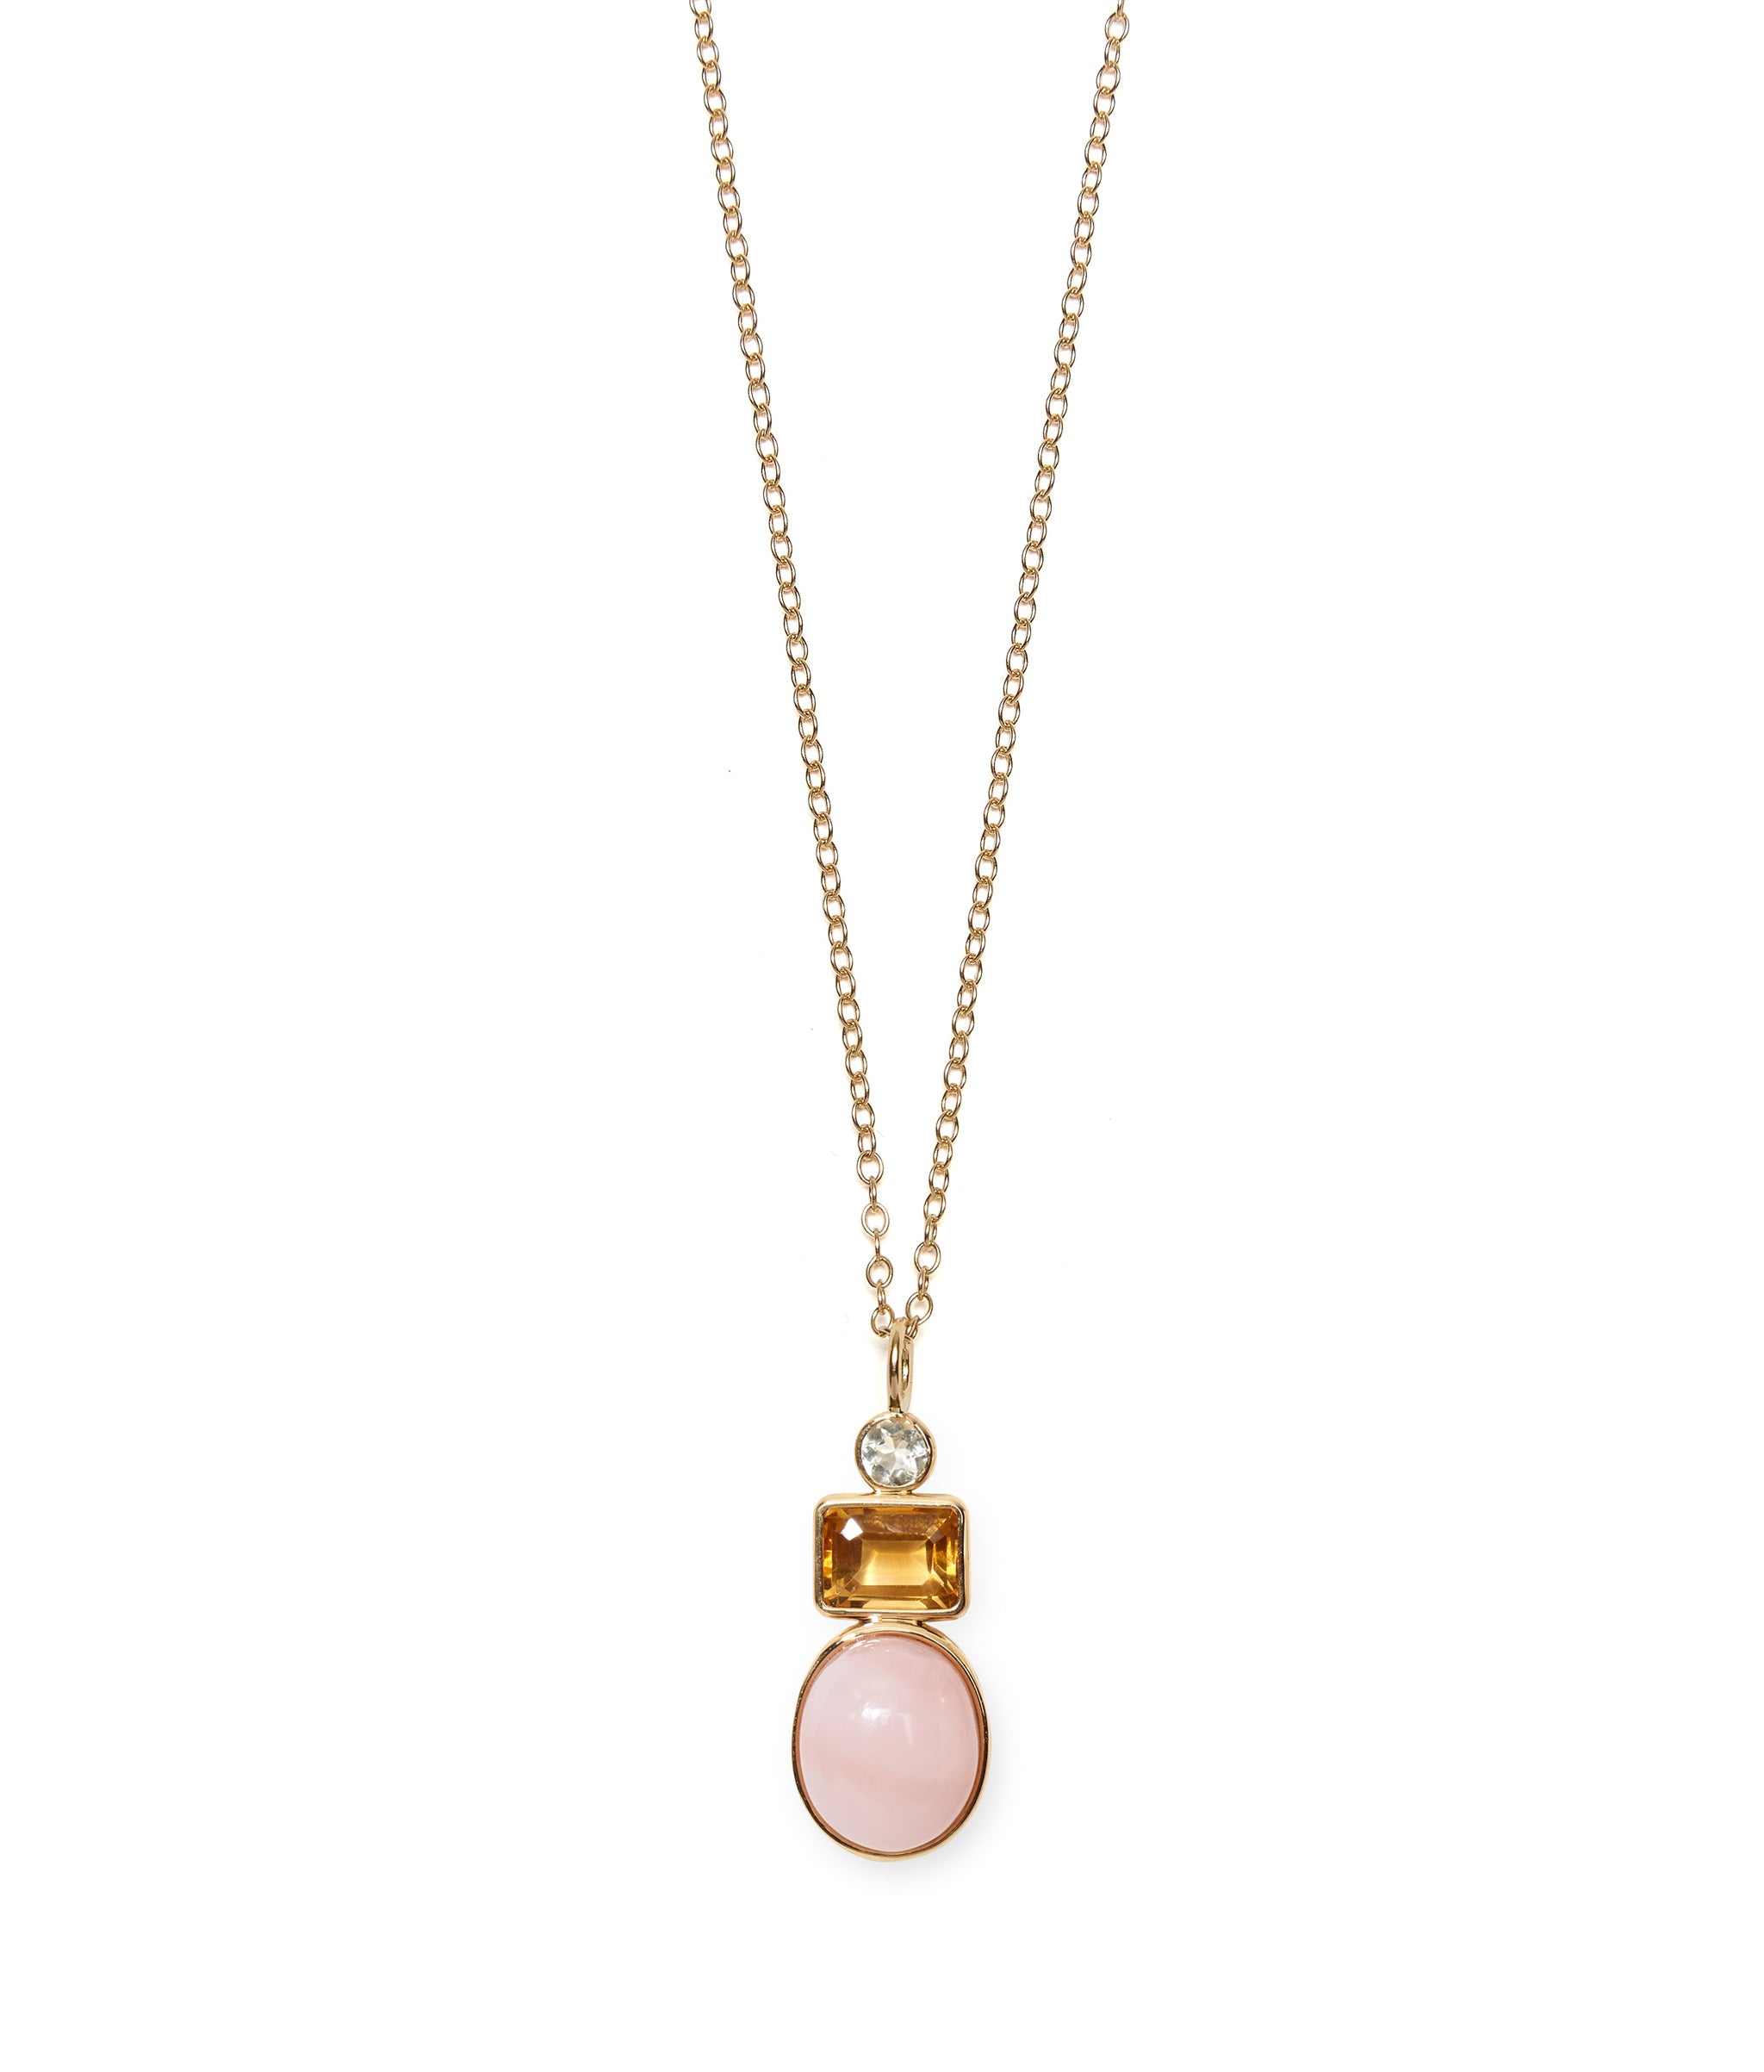 Oval Column 14k Gold Necklace Charm in Green Amethyst, Citrine & Pink Opal Cabochon close-up on a fine mood chain.